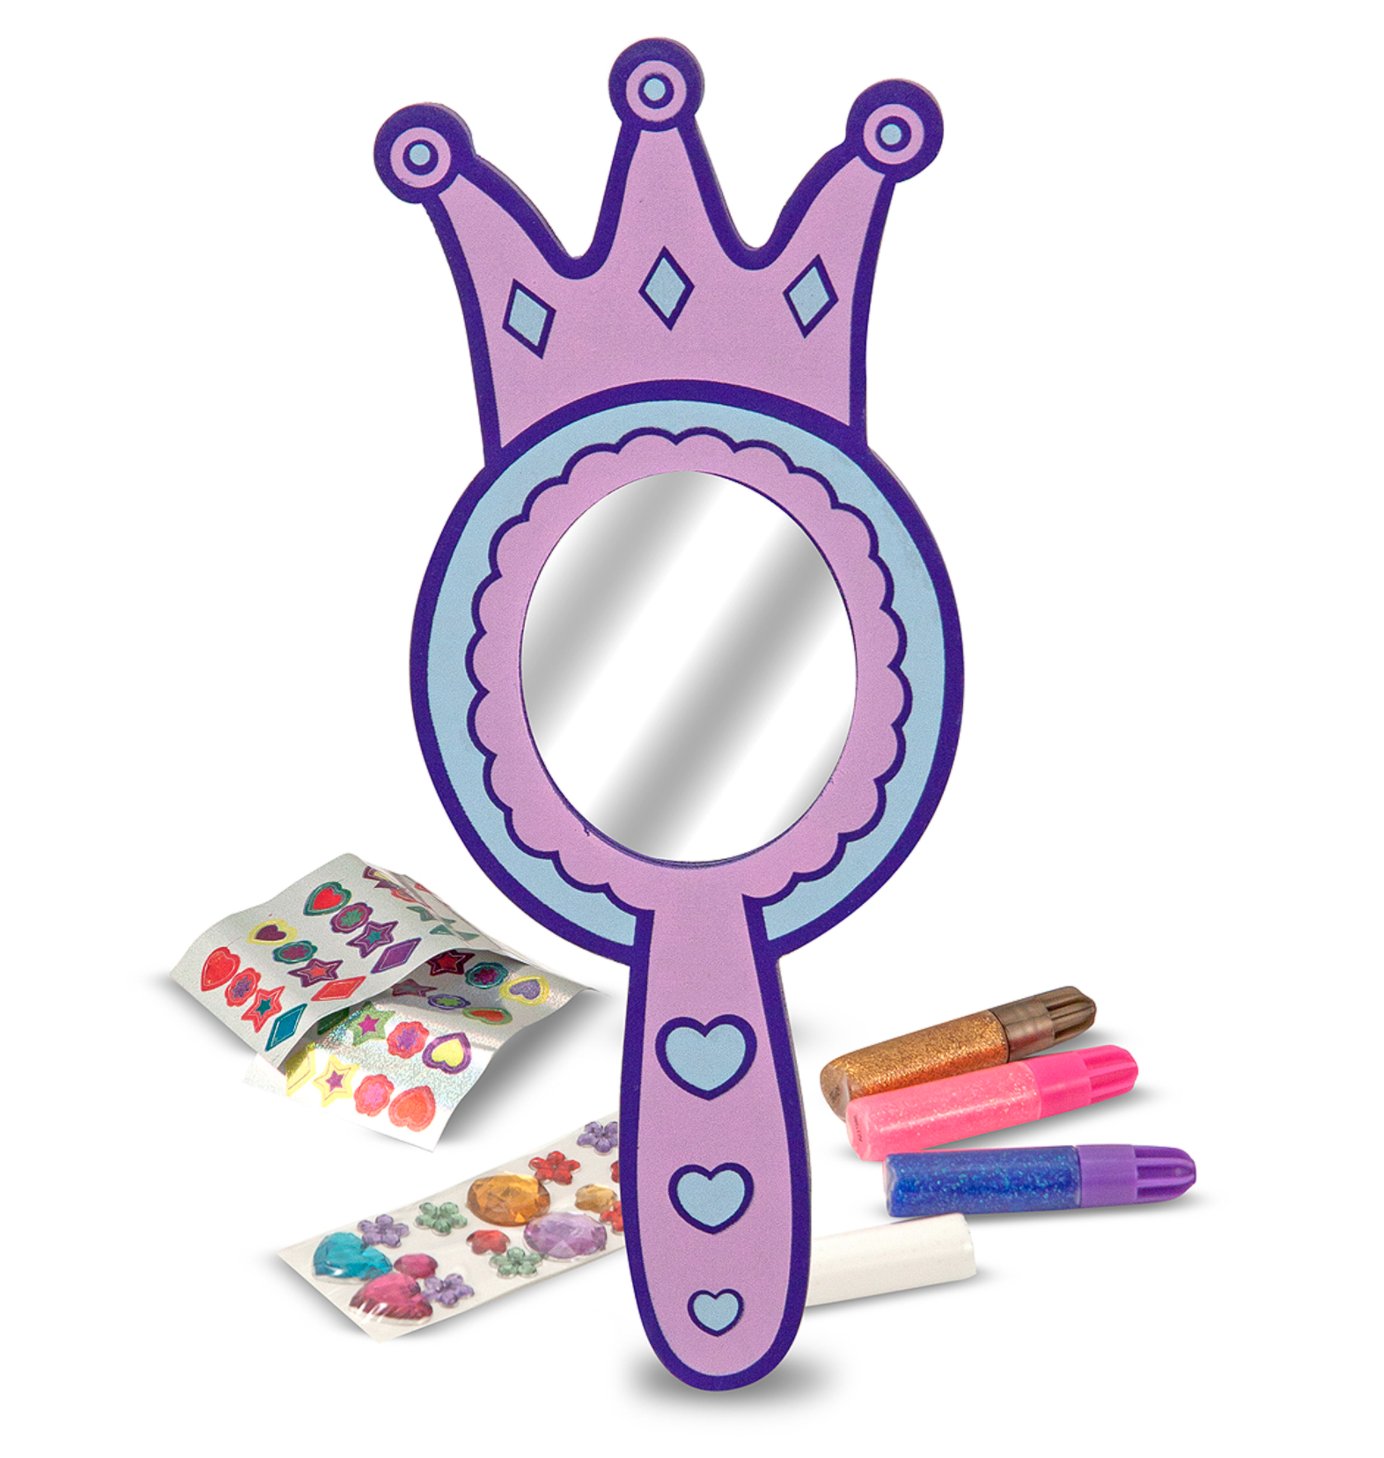 Decorate Your Own Wooden Princess Mirror